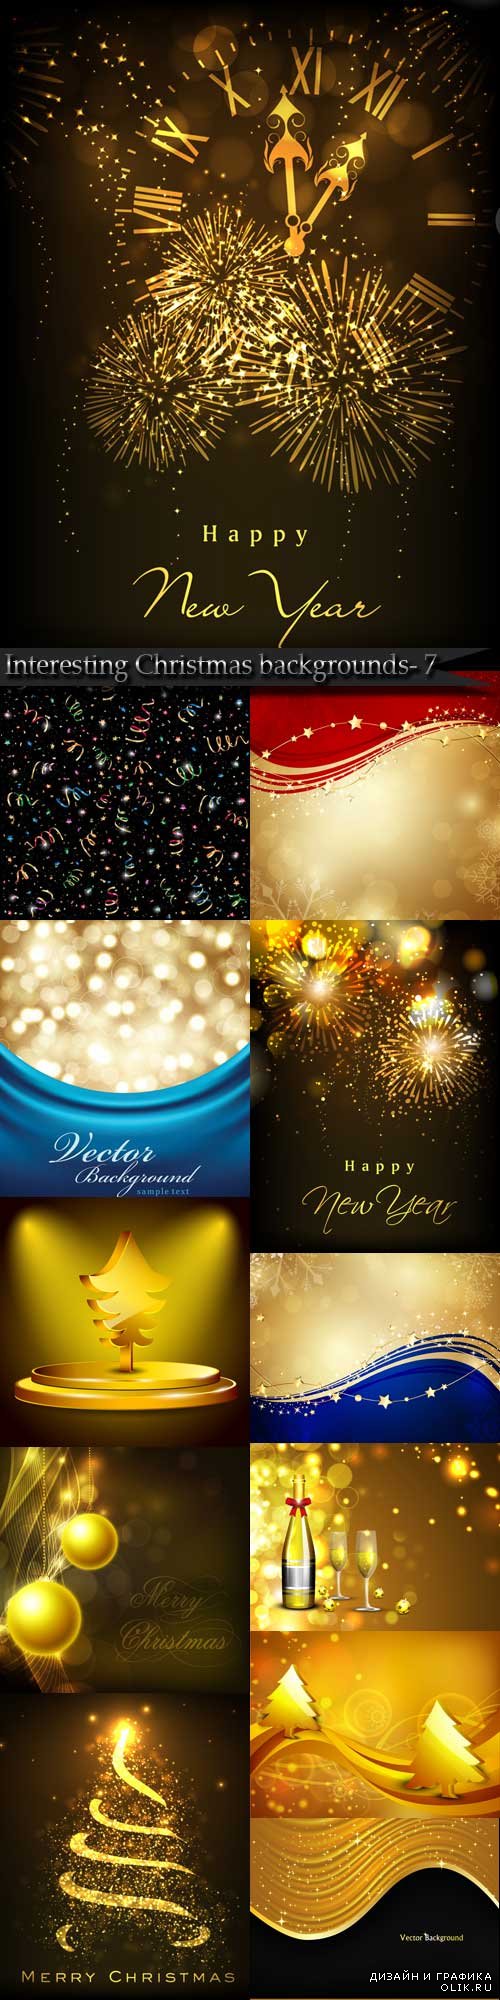 Interesting Christmas vector backgrounds- 7